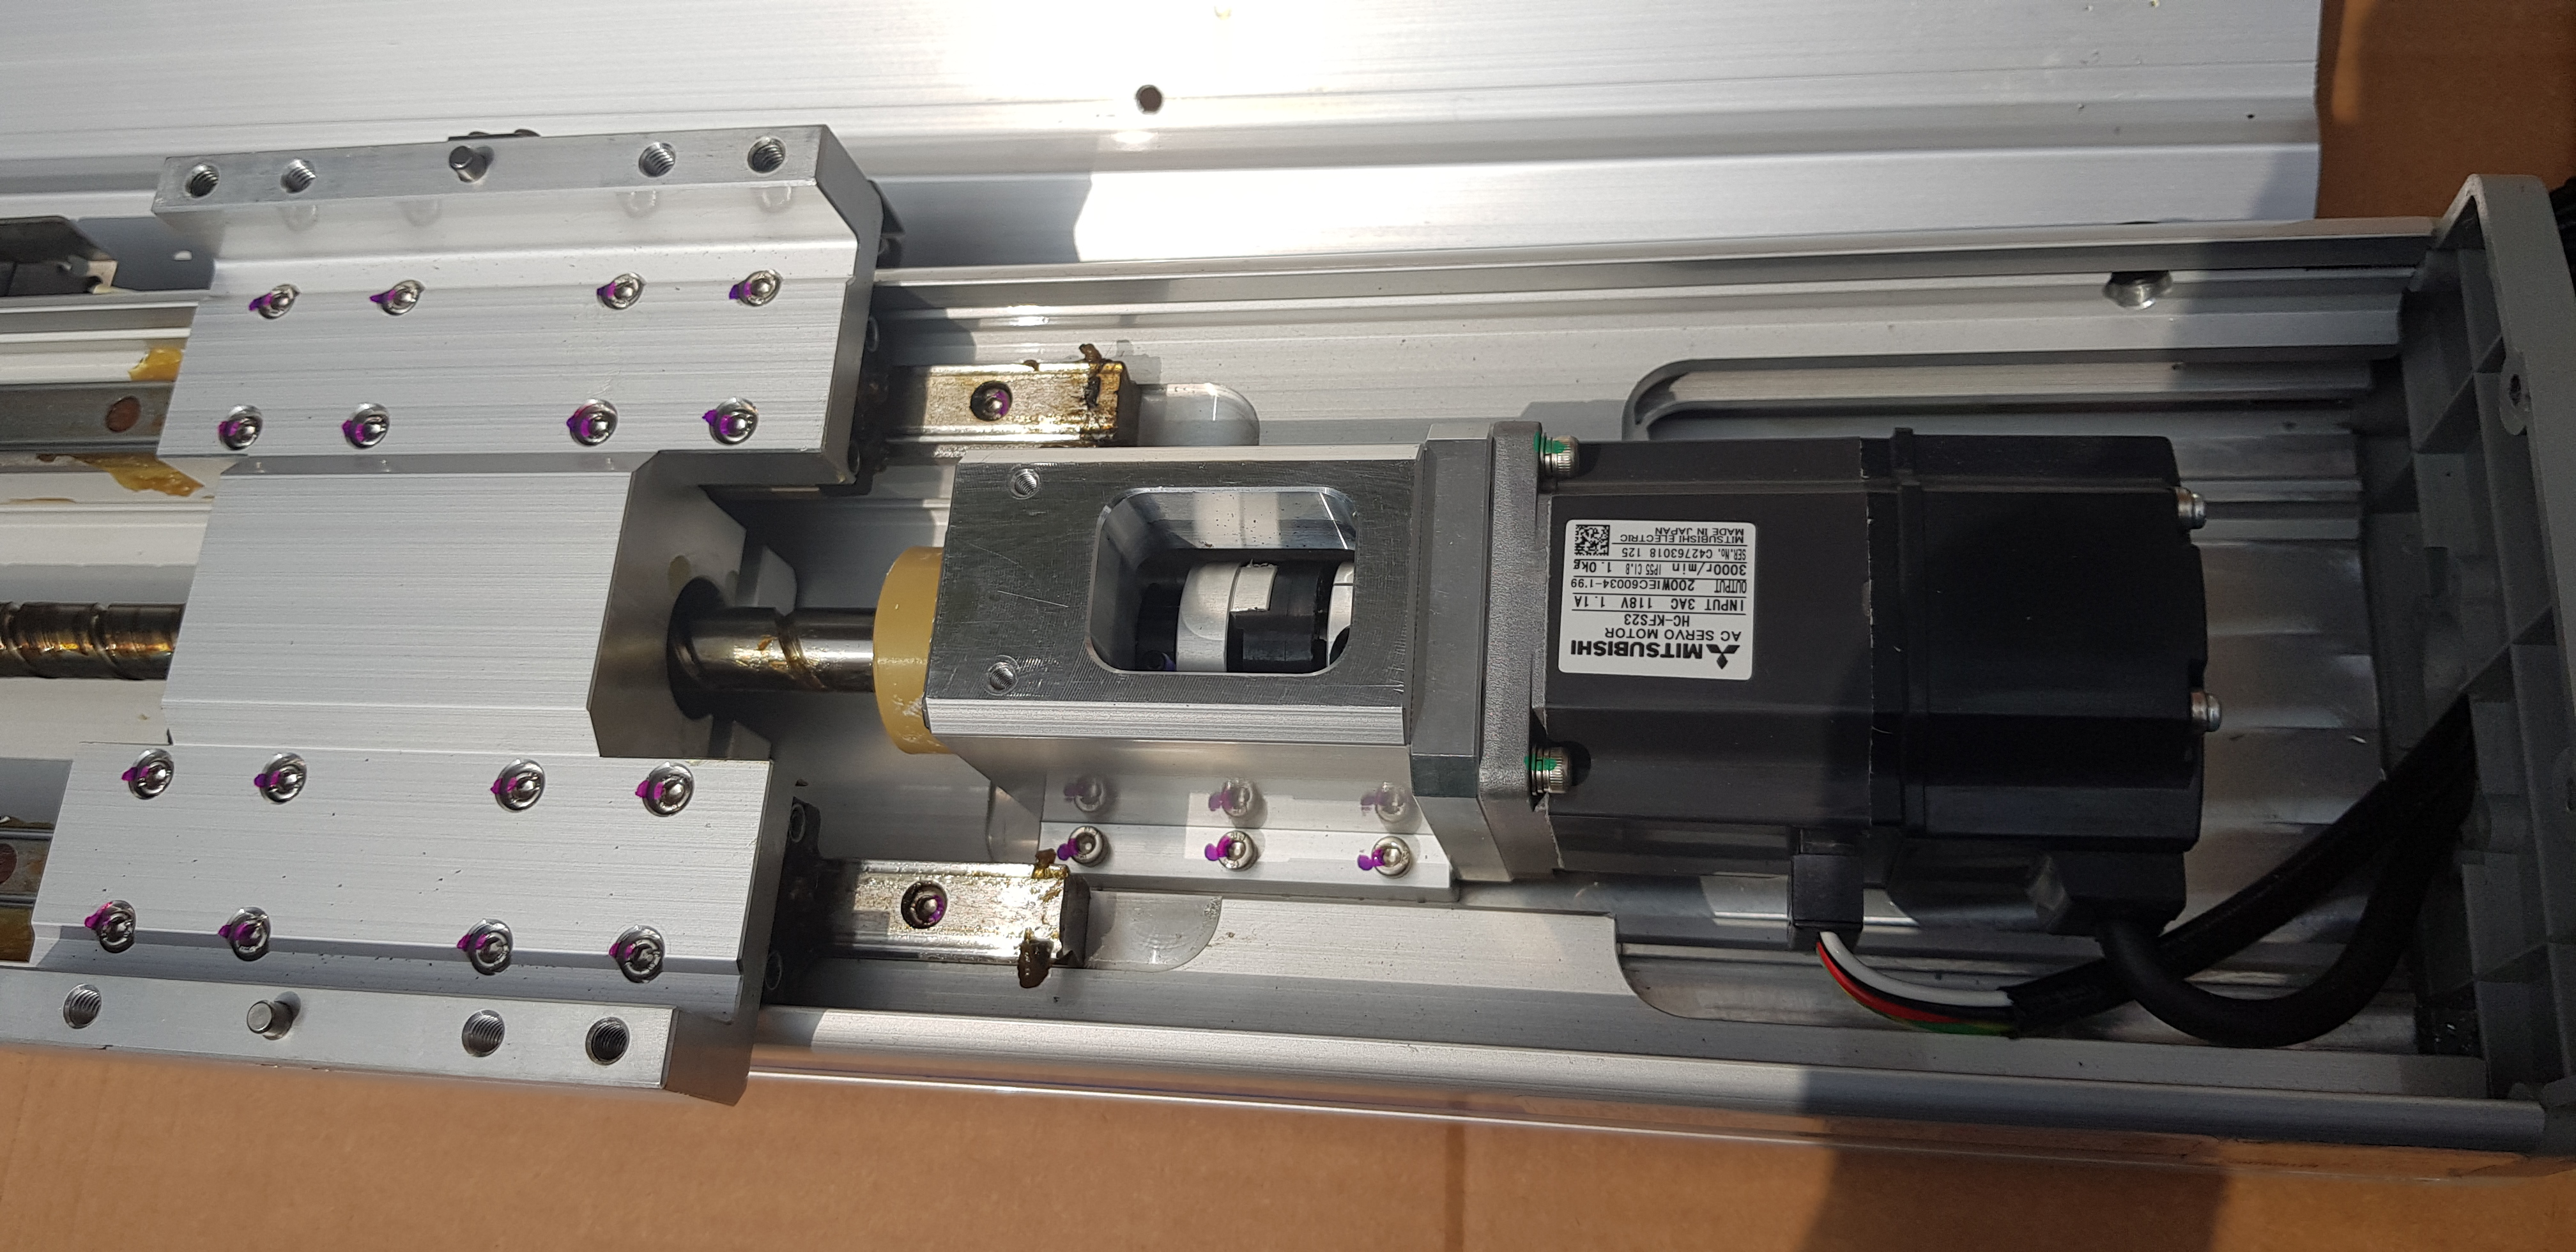 ACTUATOR RS-140-X20SS ST.180 (중고)